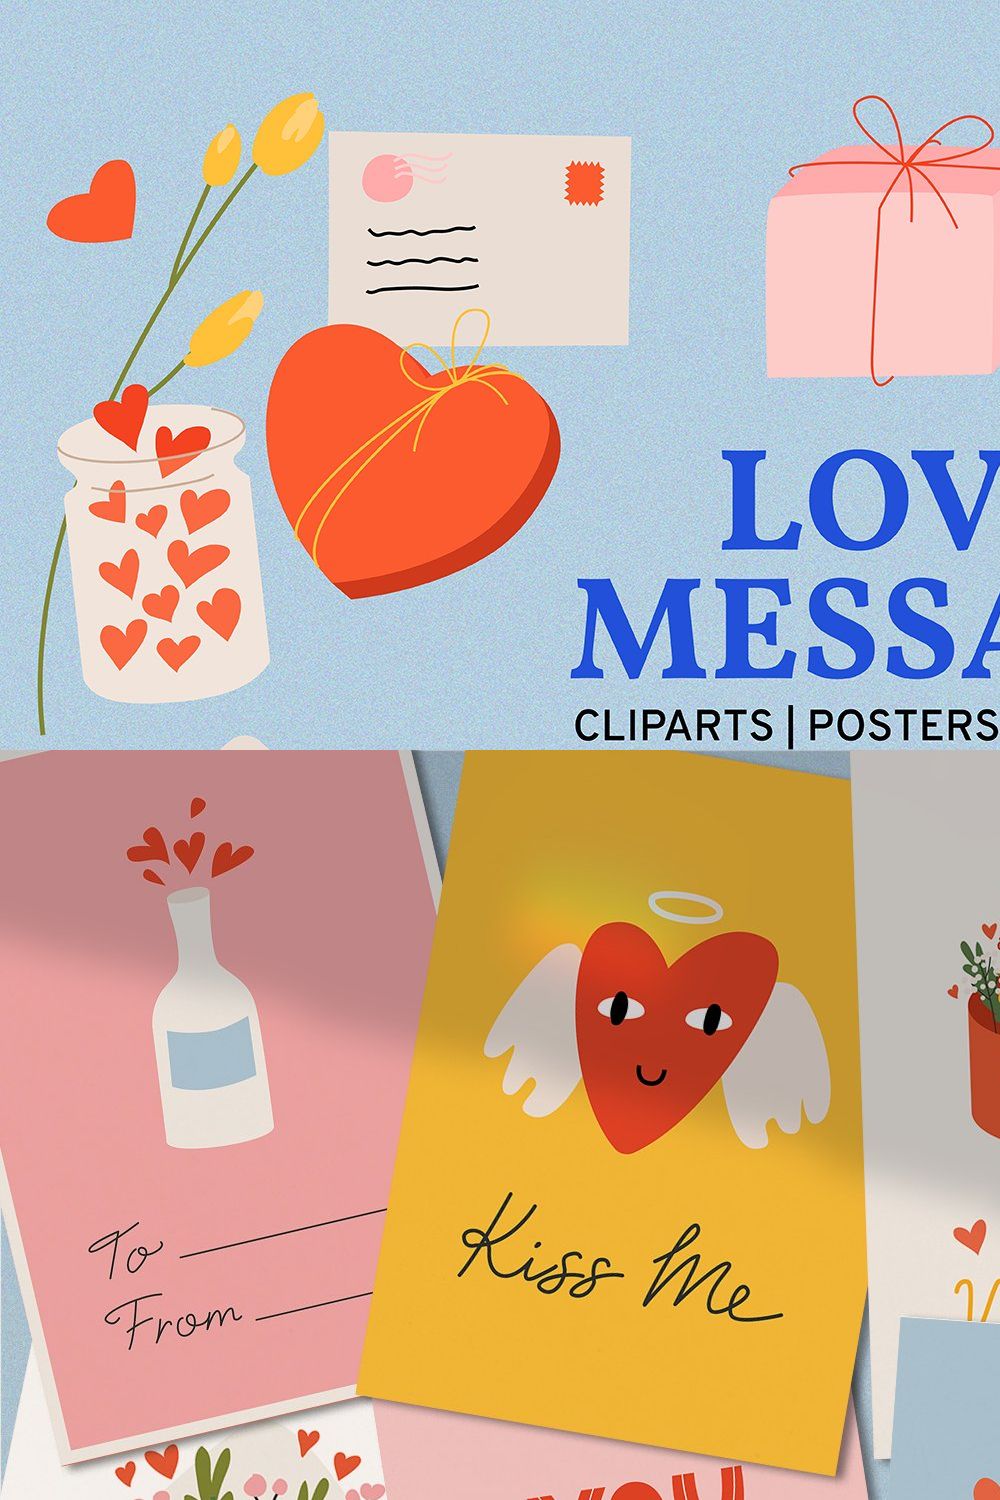 Love Message Valentine's day clipart pinterest preview image.